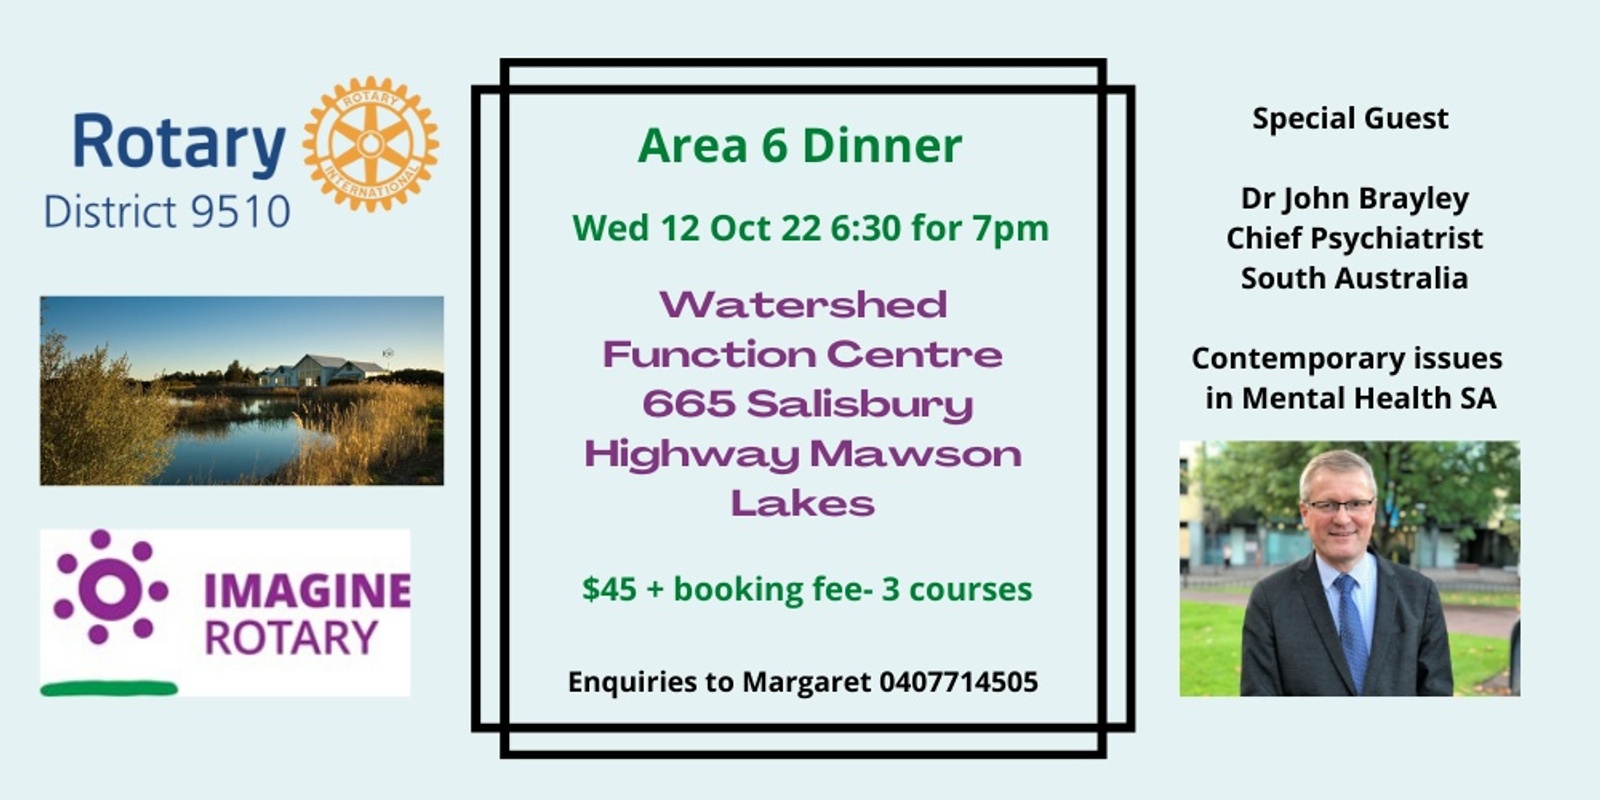 Banner image for Rotary District 9510 Area 6 Dinner